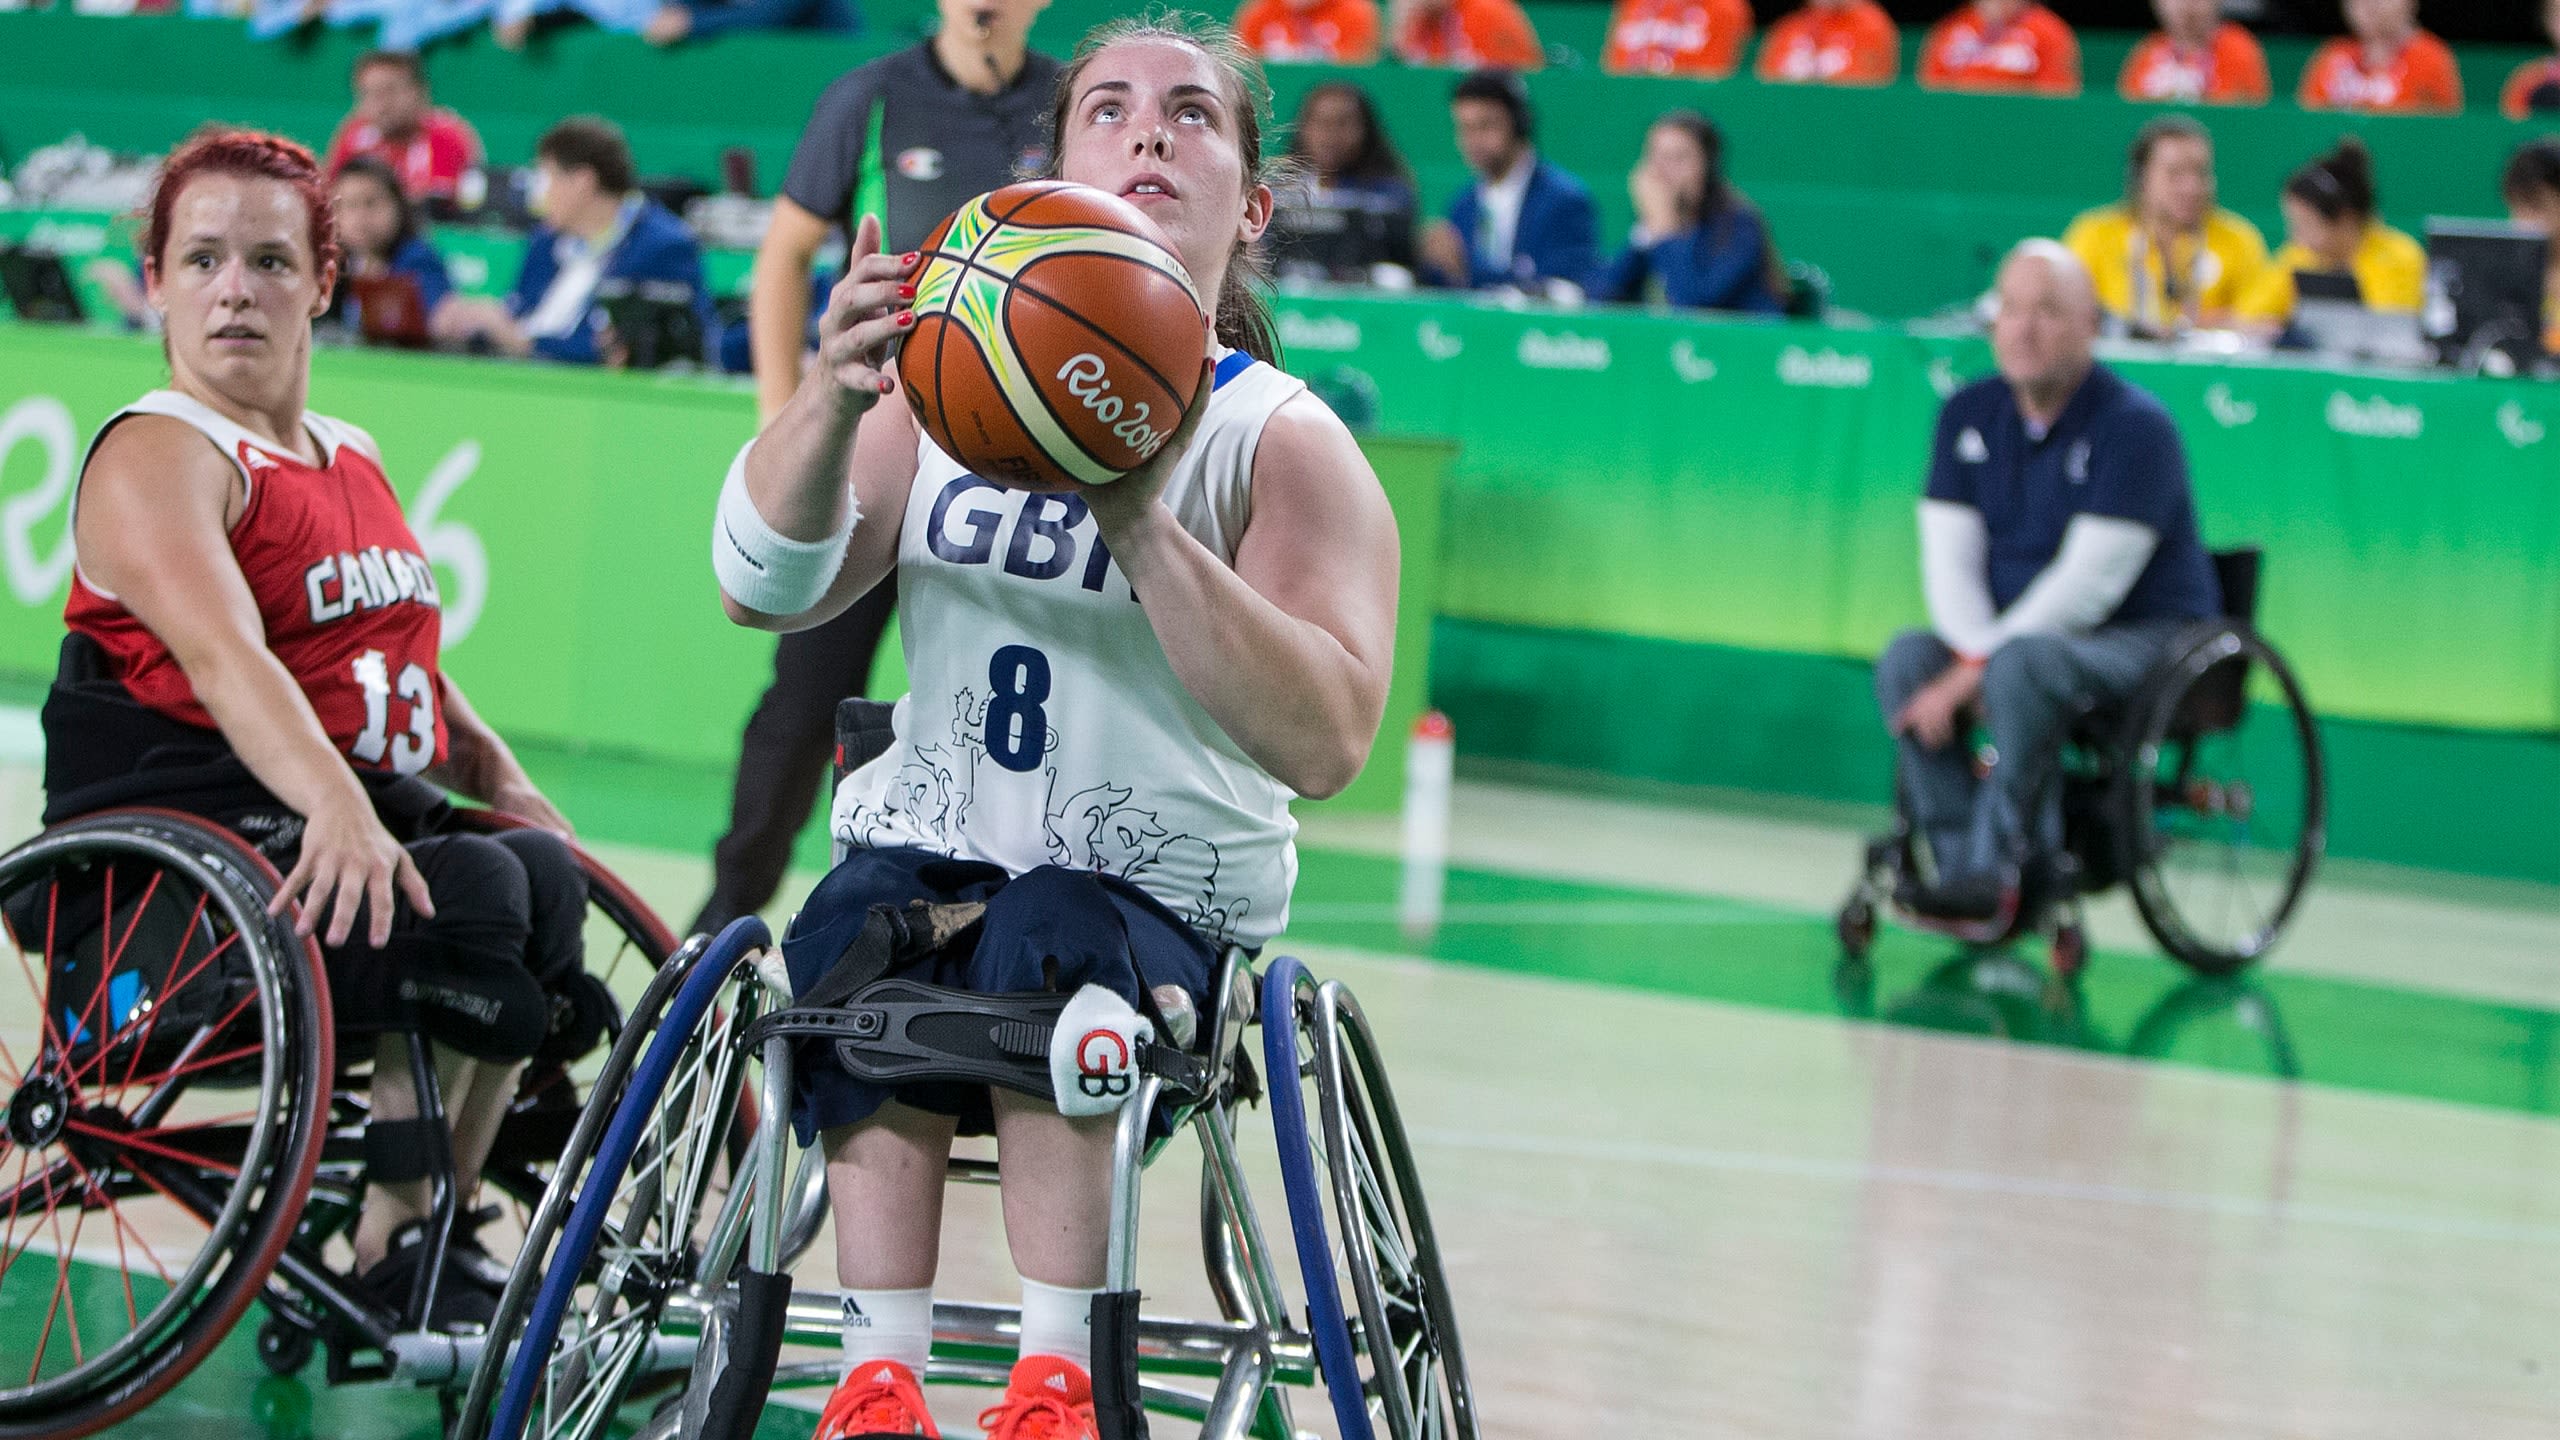 Laurie Williams, wheelchair basketball player at the Rio 2016 Paralympics